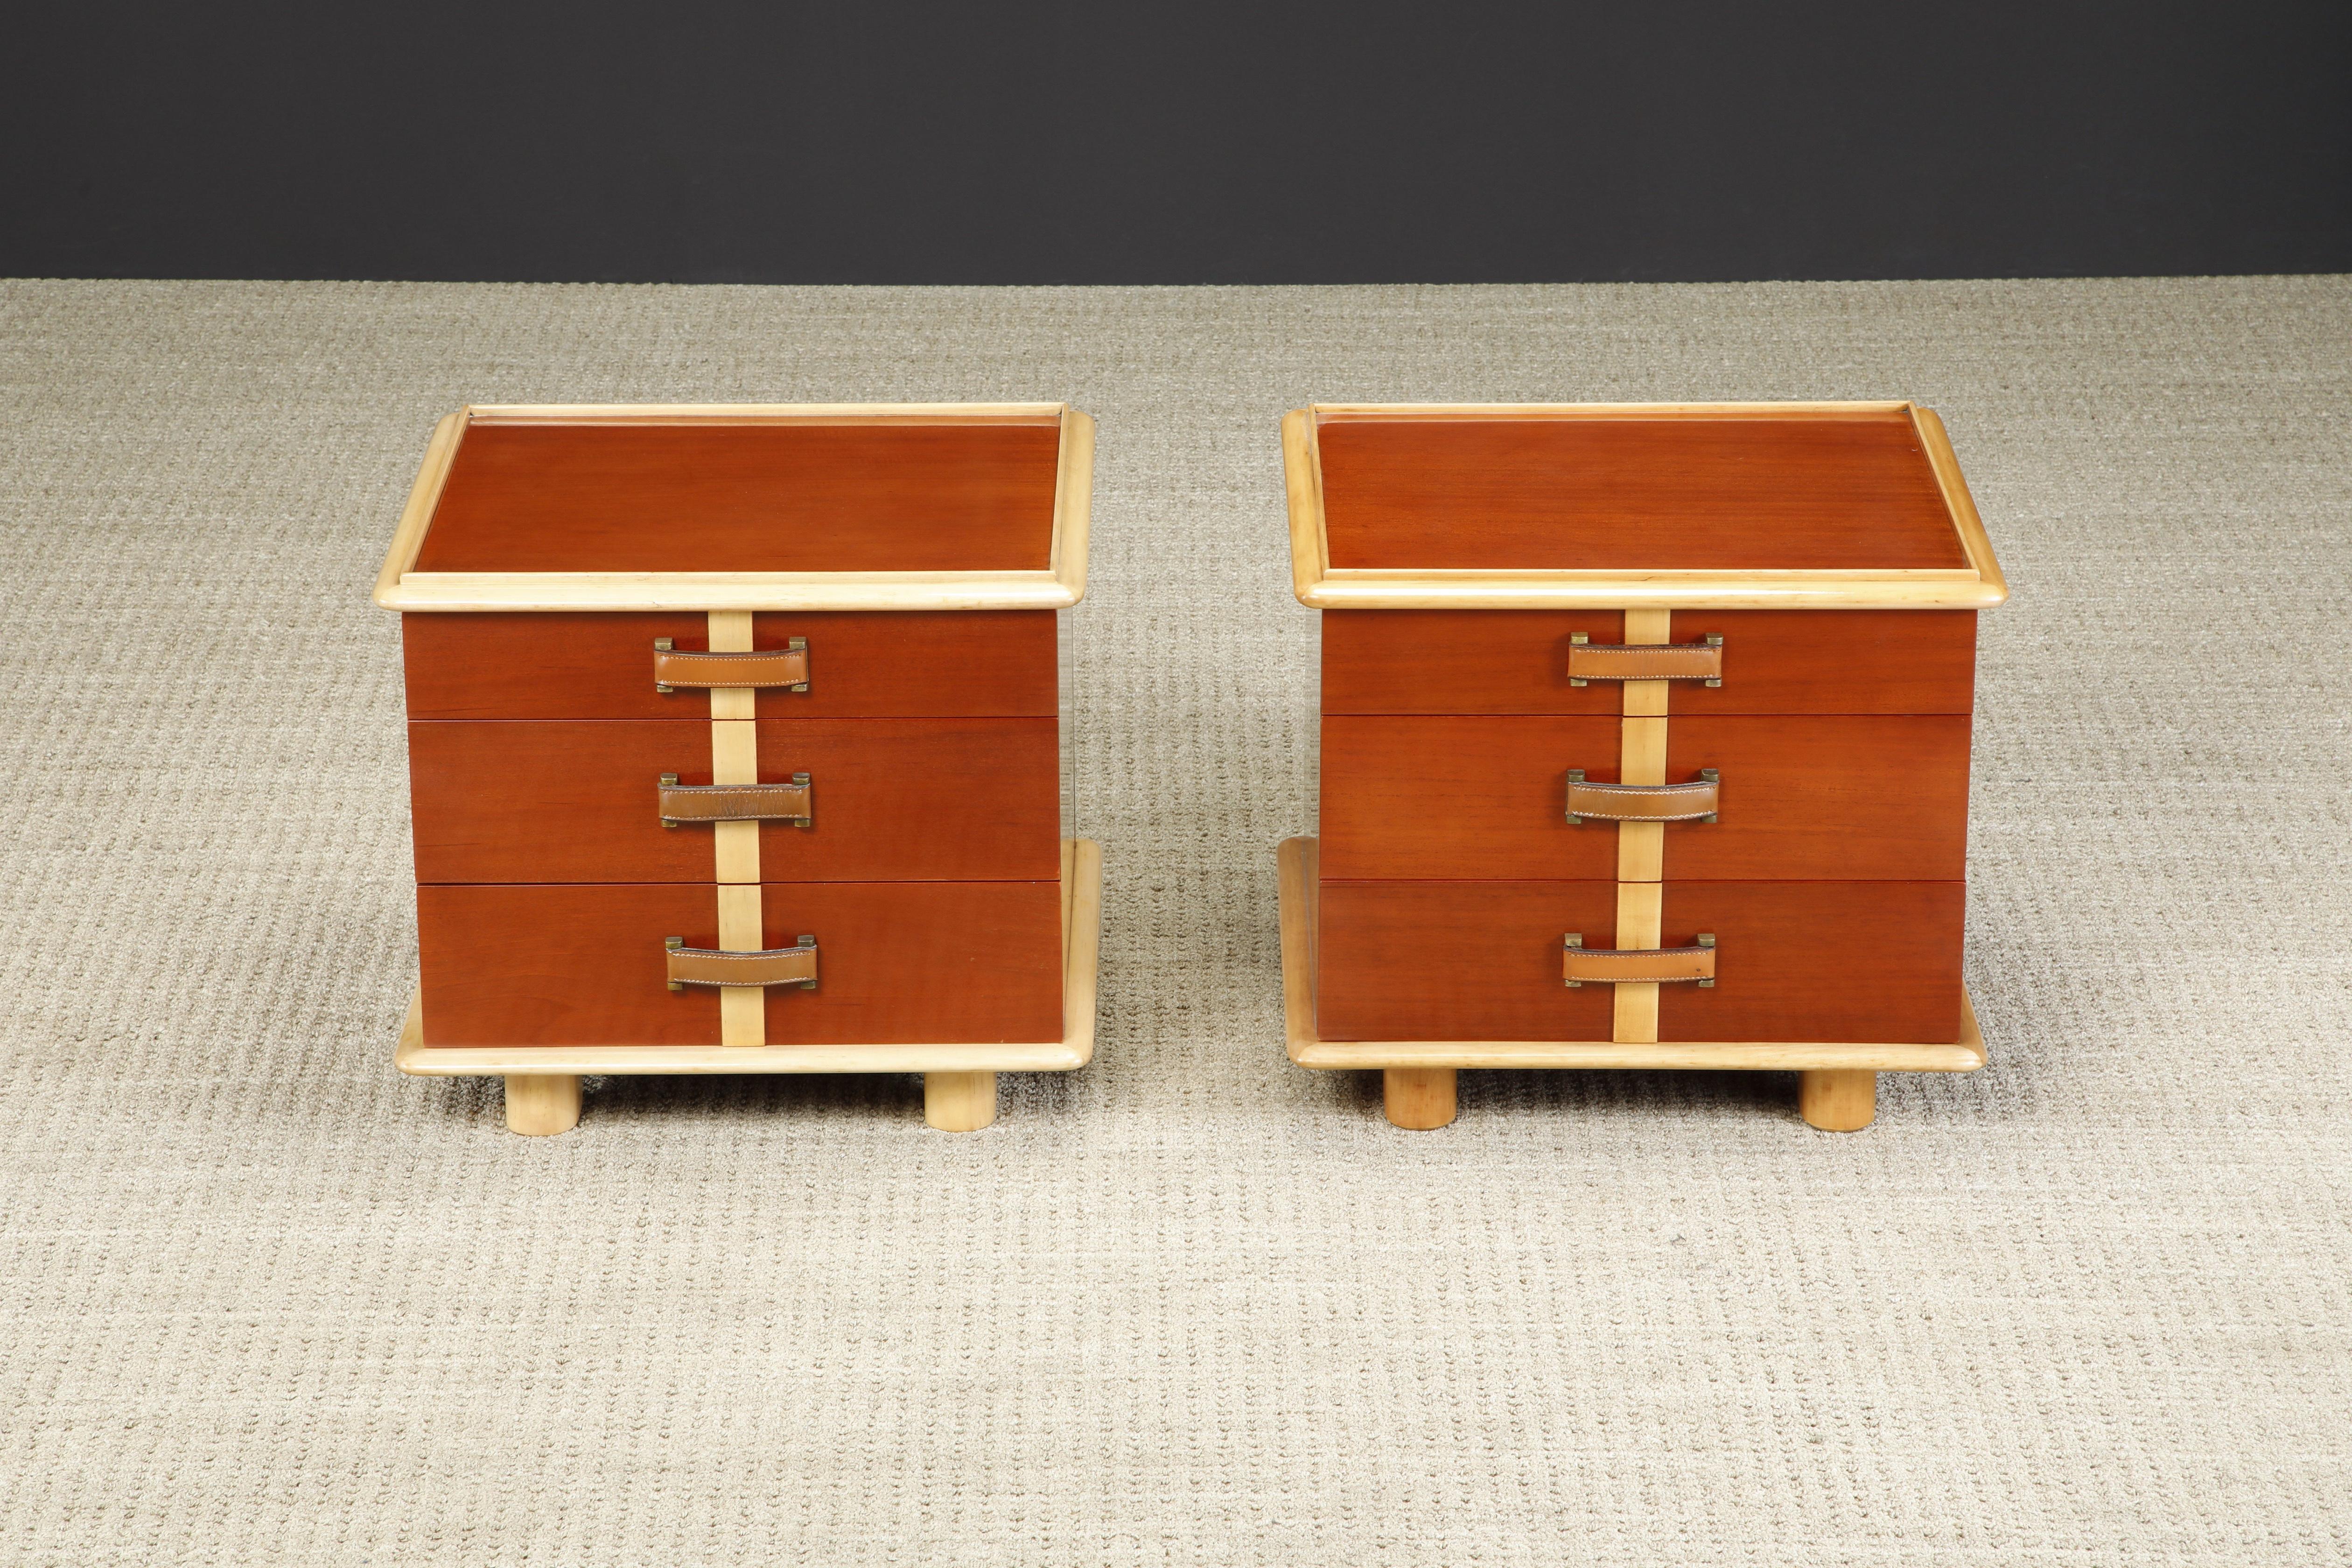 American 'Station Wagon' Nightstands by Paul Frankl for Johnson Furniture, c 1945, Signed